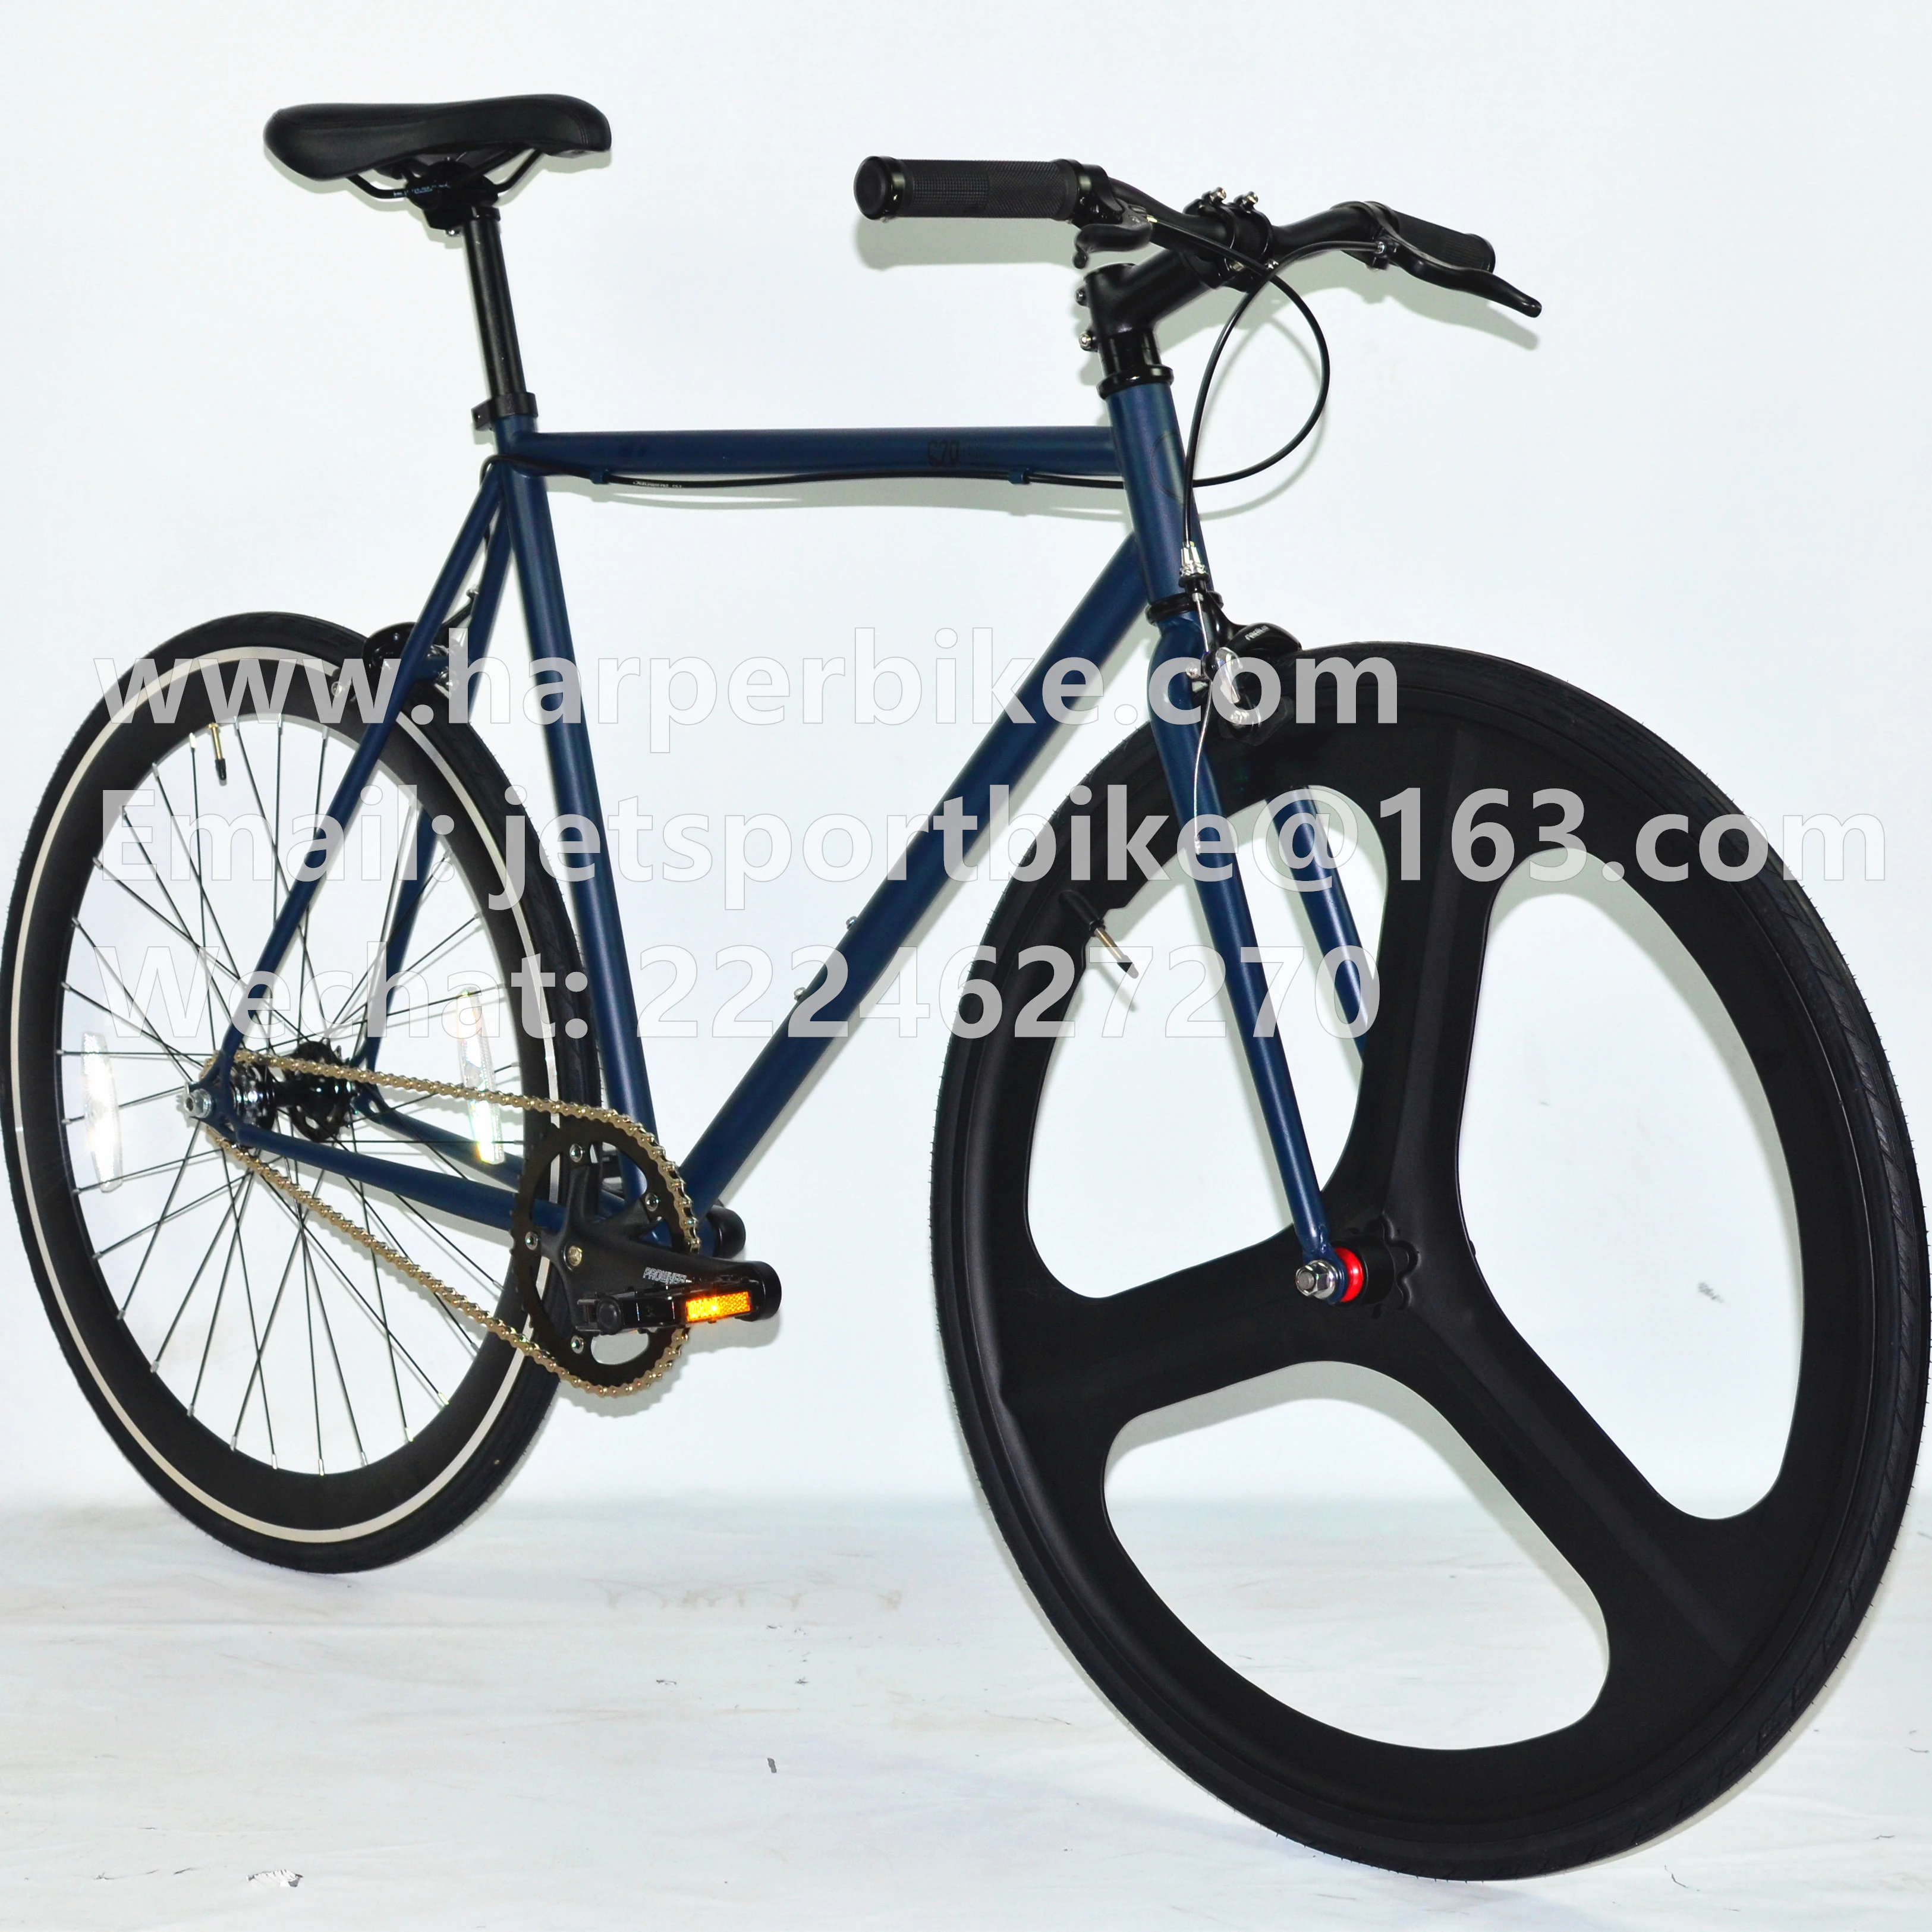 Ce approved fixie bike fixed gear bicycle 700C